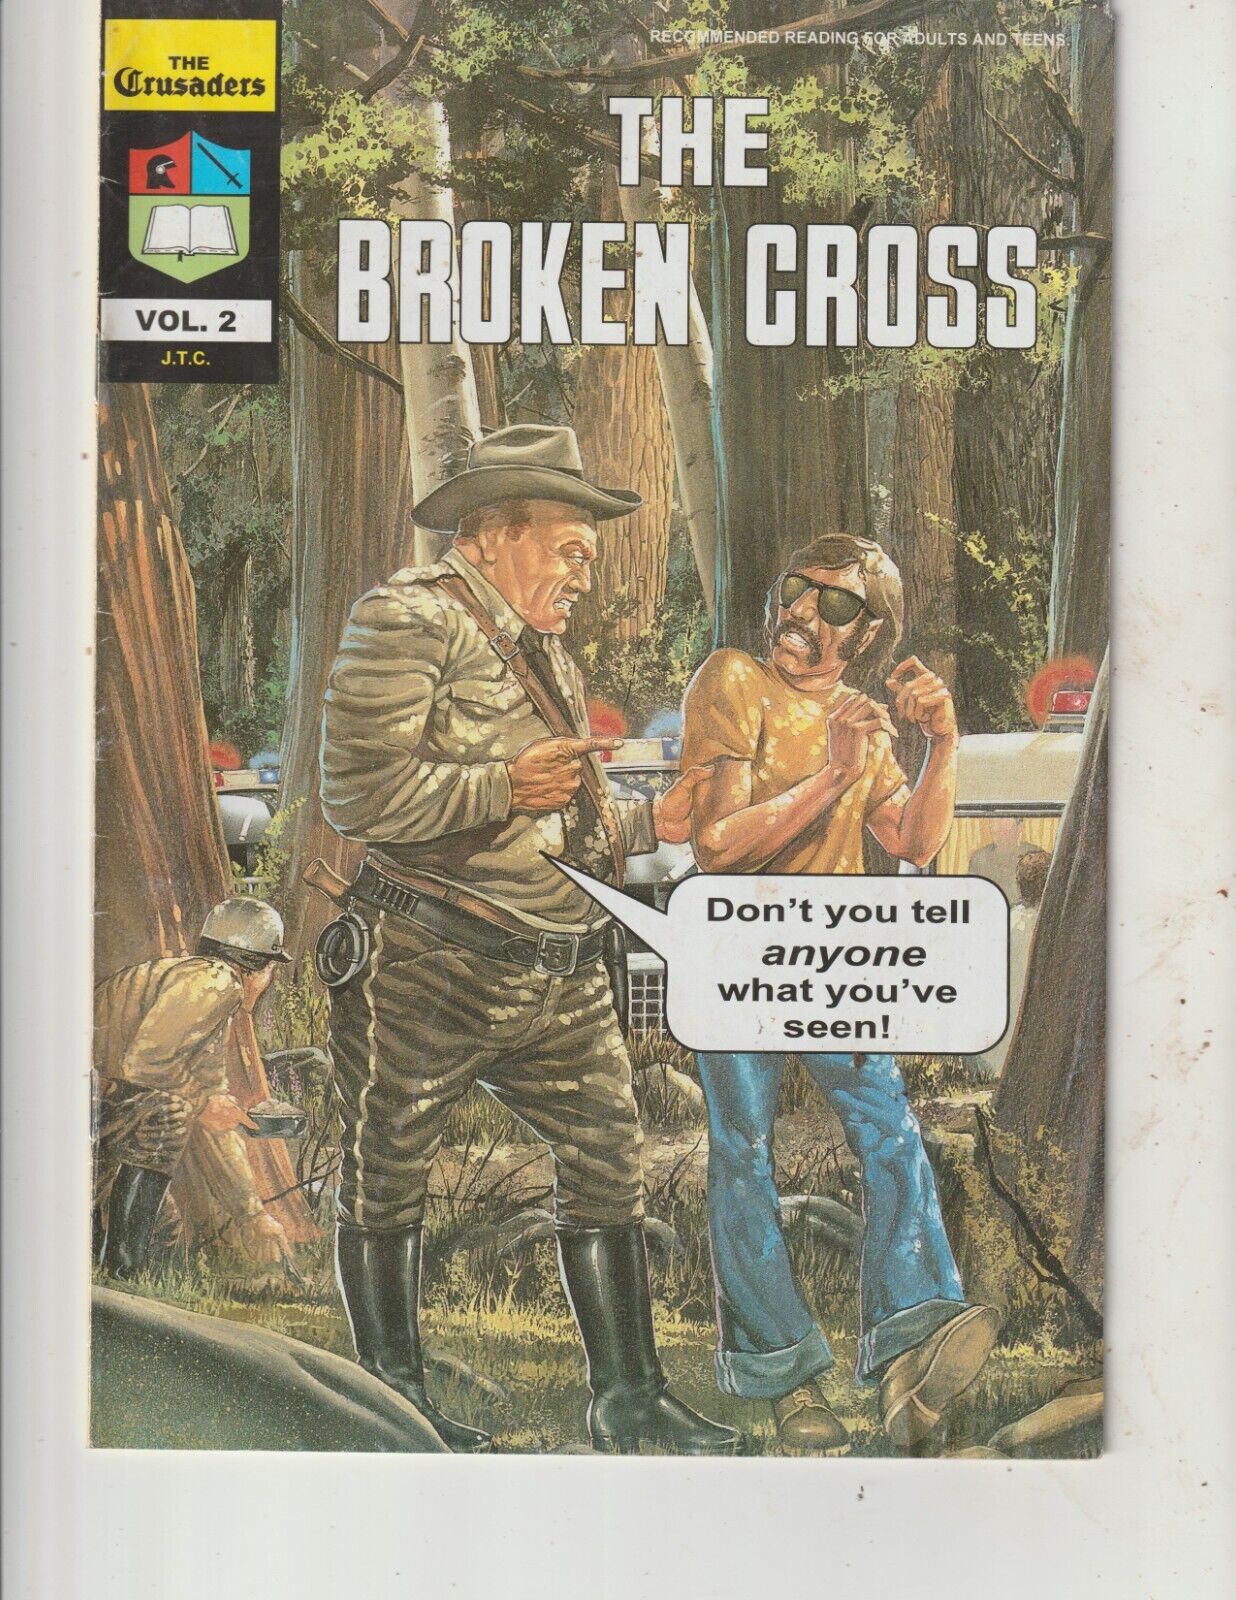 The Broken Cross: The Crusaders Jack Chick comic Sent 1st class mail from OKLA.